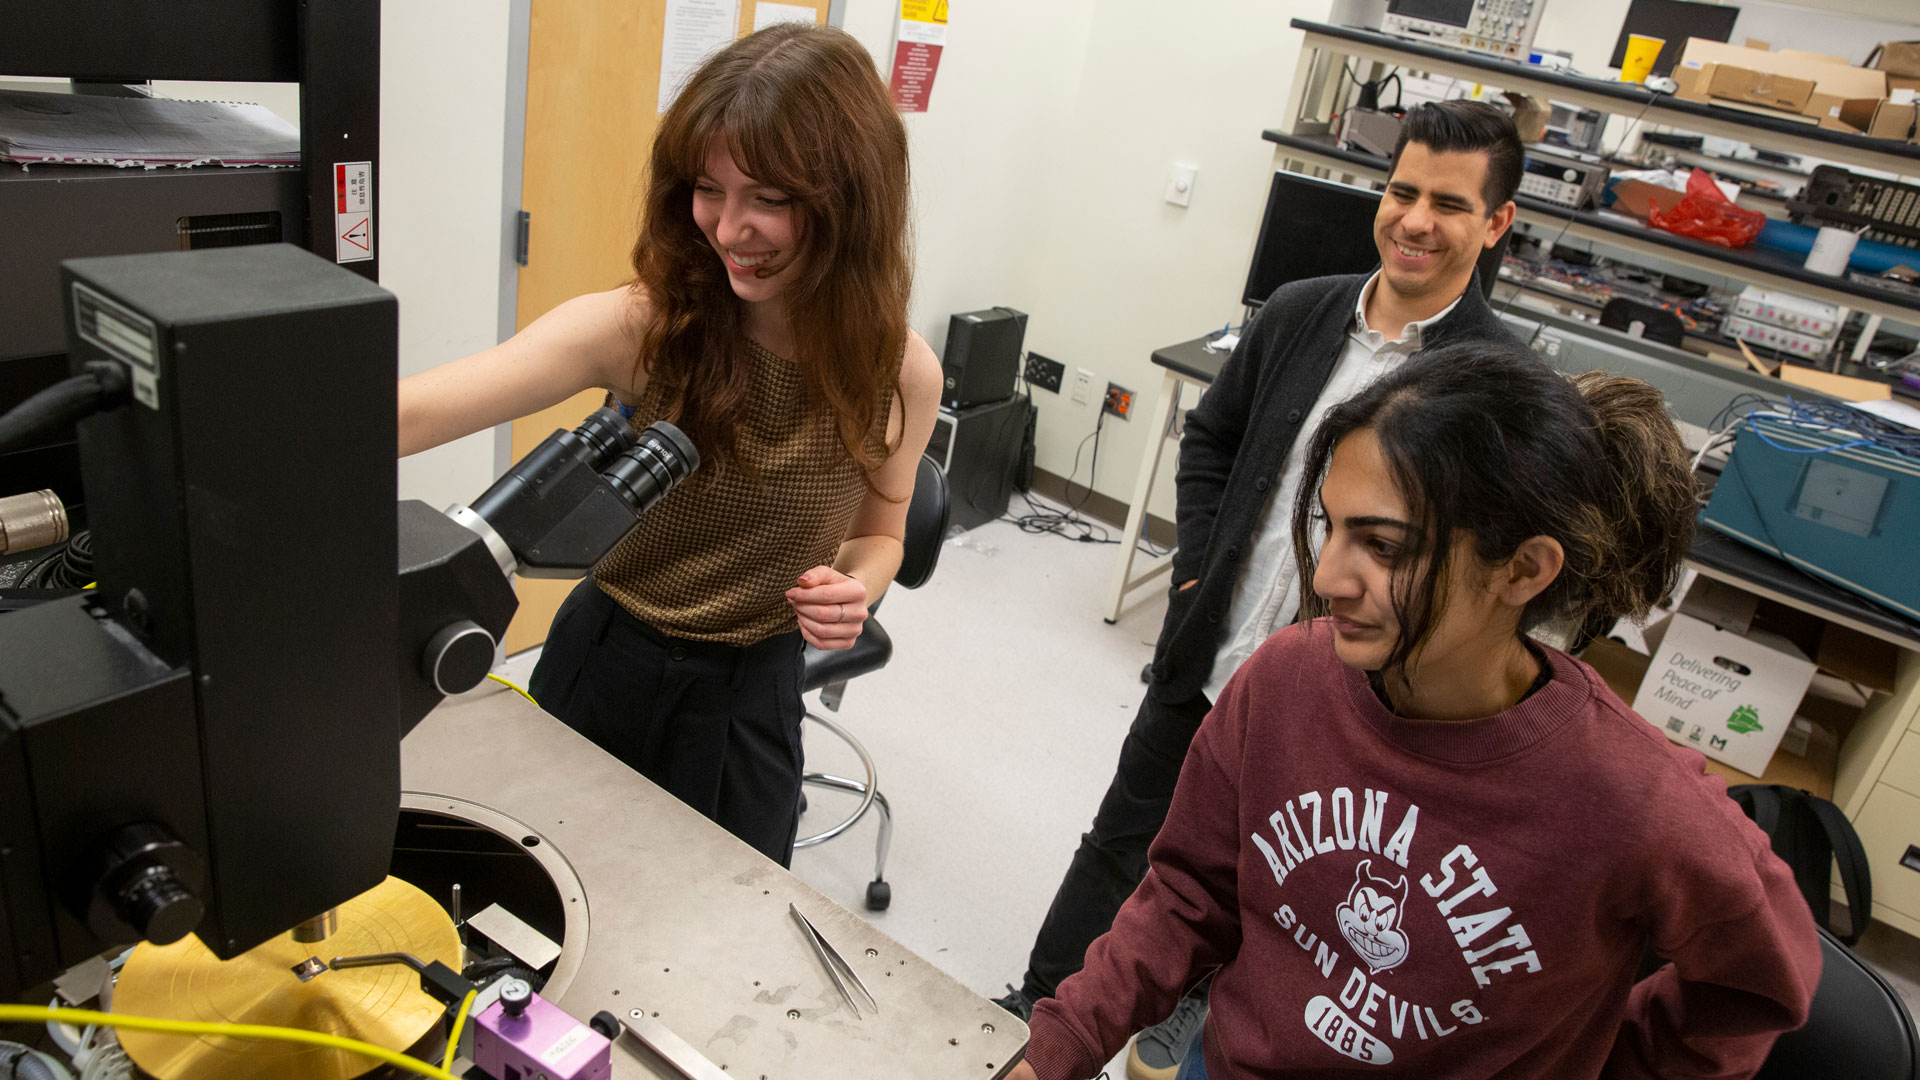 Two students work with lab equipment while their faculty mentor watches.